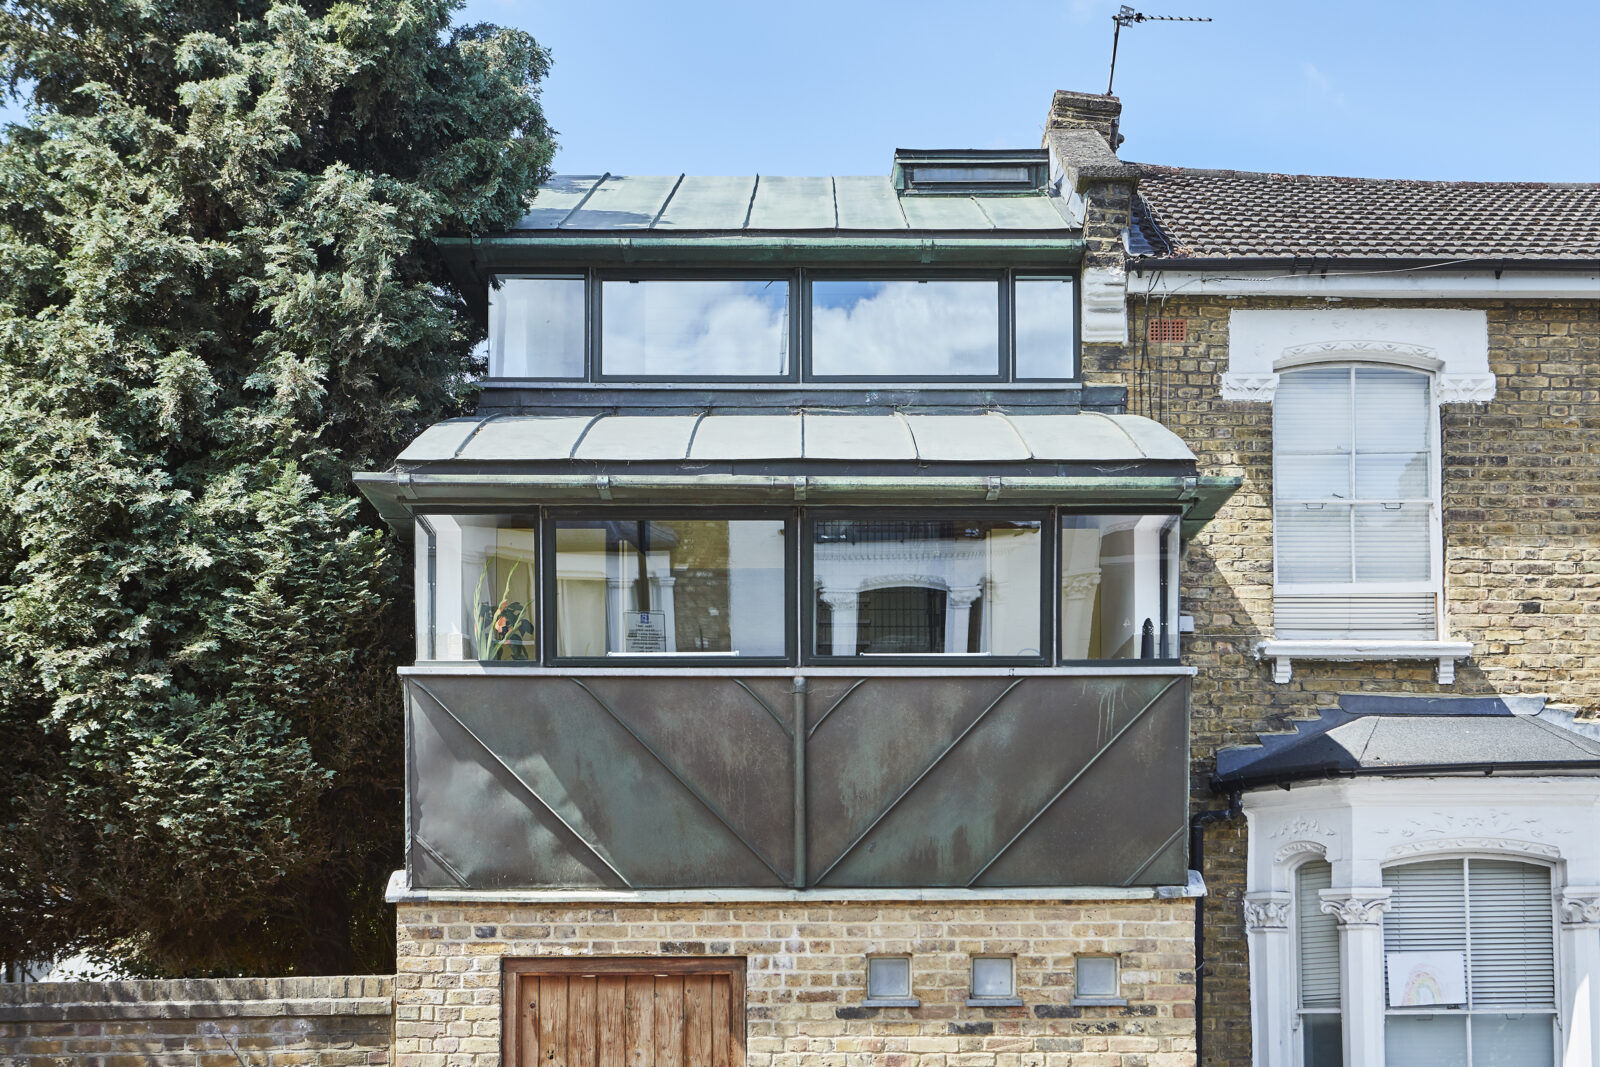 Venus is a London townhouse with Japanese roots - the Highbury home was inspired by the traditional machiya or merchant’s houses found across Kyoto.